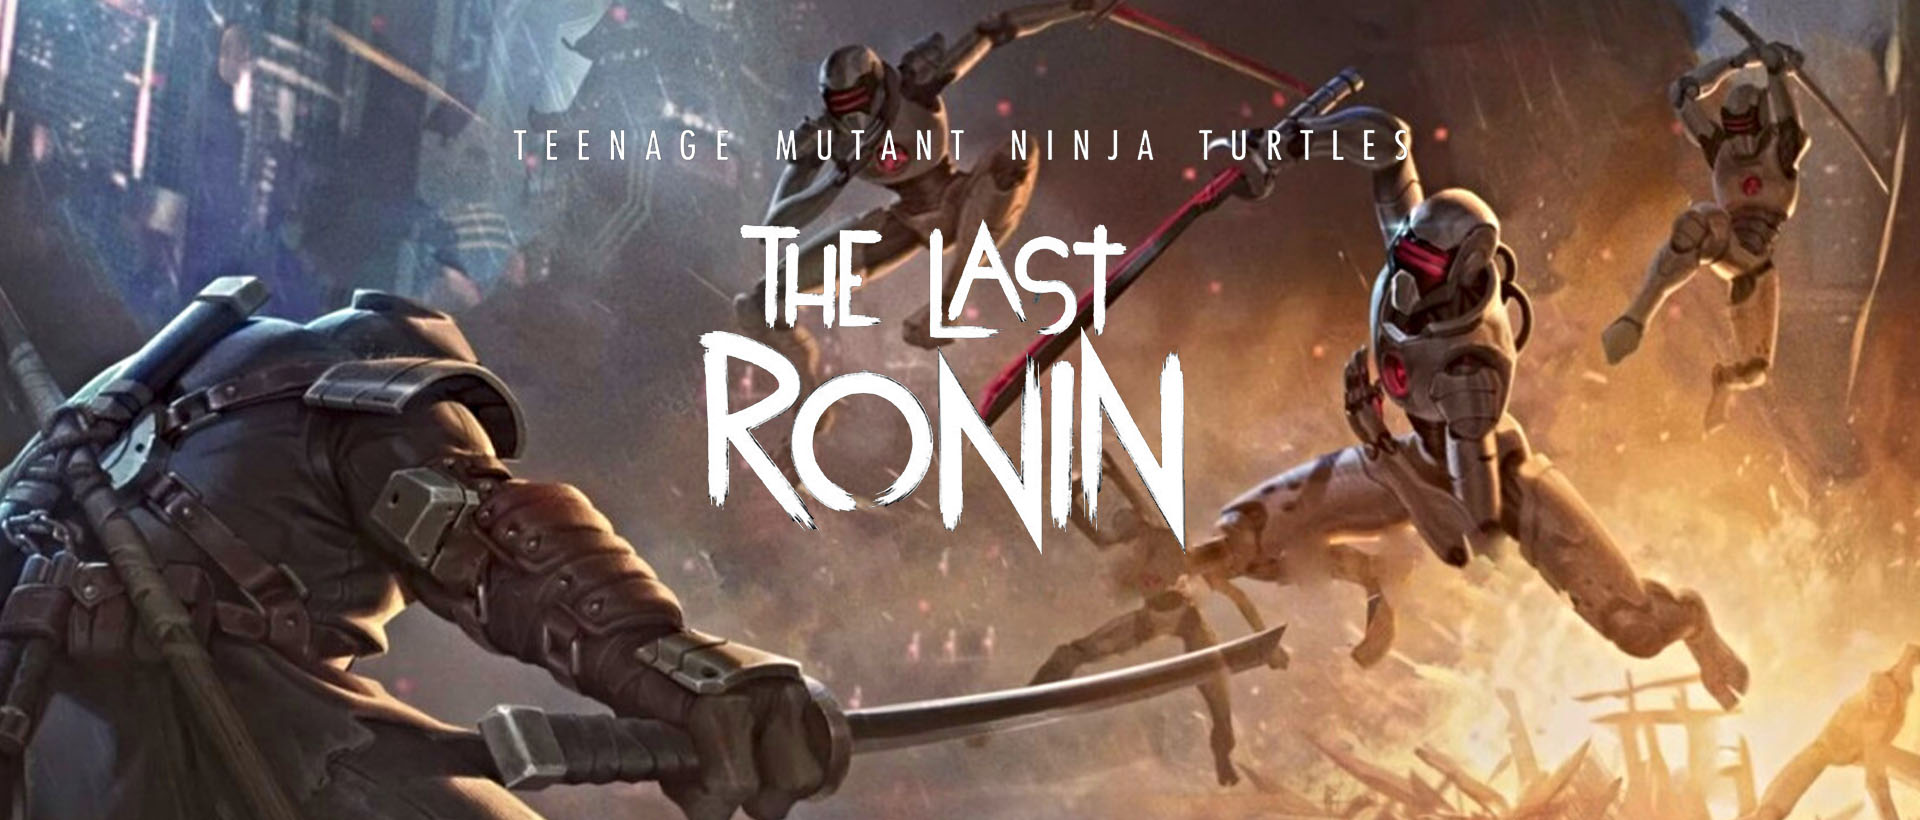 TMNT The Last Ronin Live action movie banner